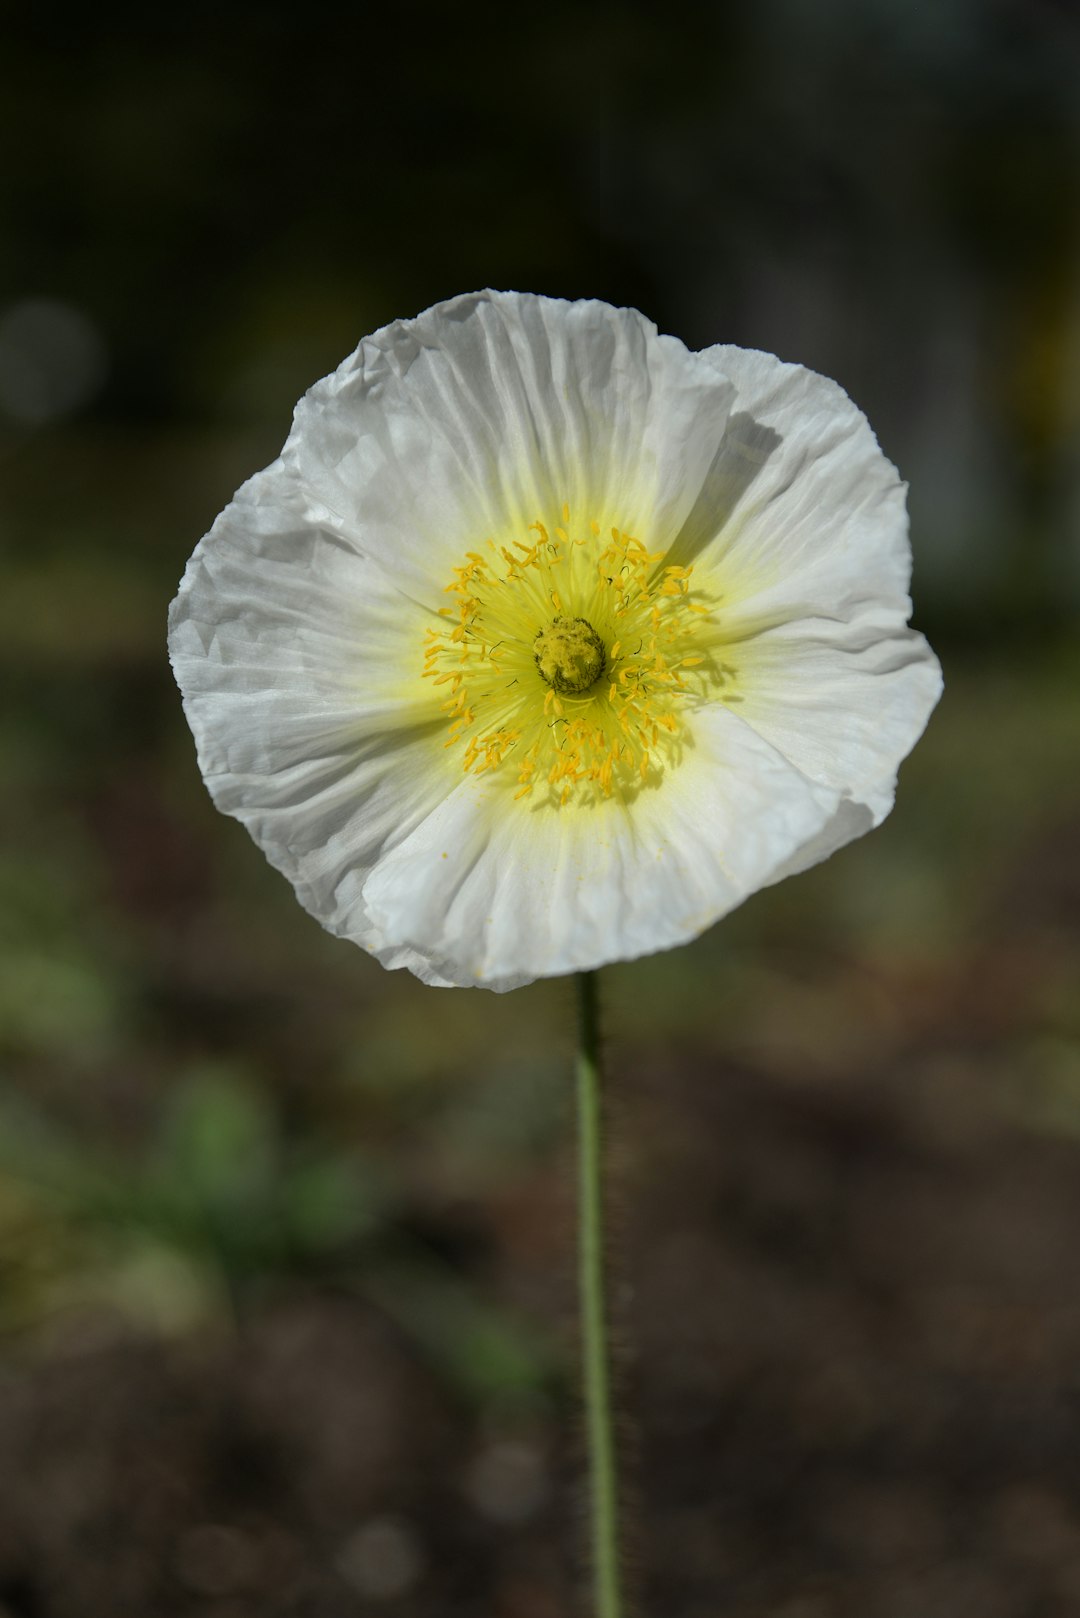 The Iceland Poppy, or Papaver Nudicaule, is native to subpolar regions of Asia and North America as well as the mountains of Central Asia. They are, however, not native to Iceland. 